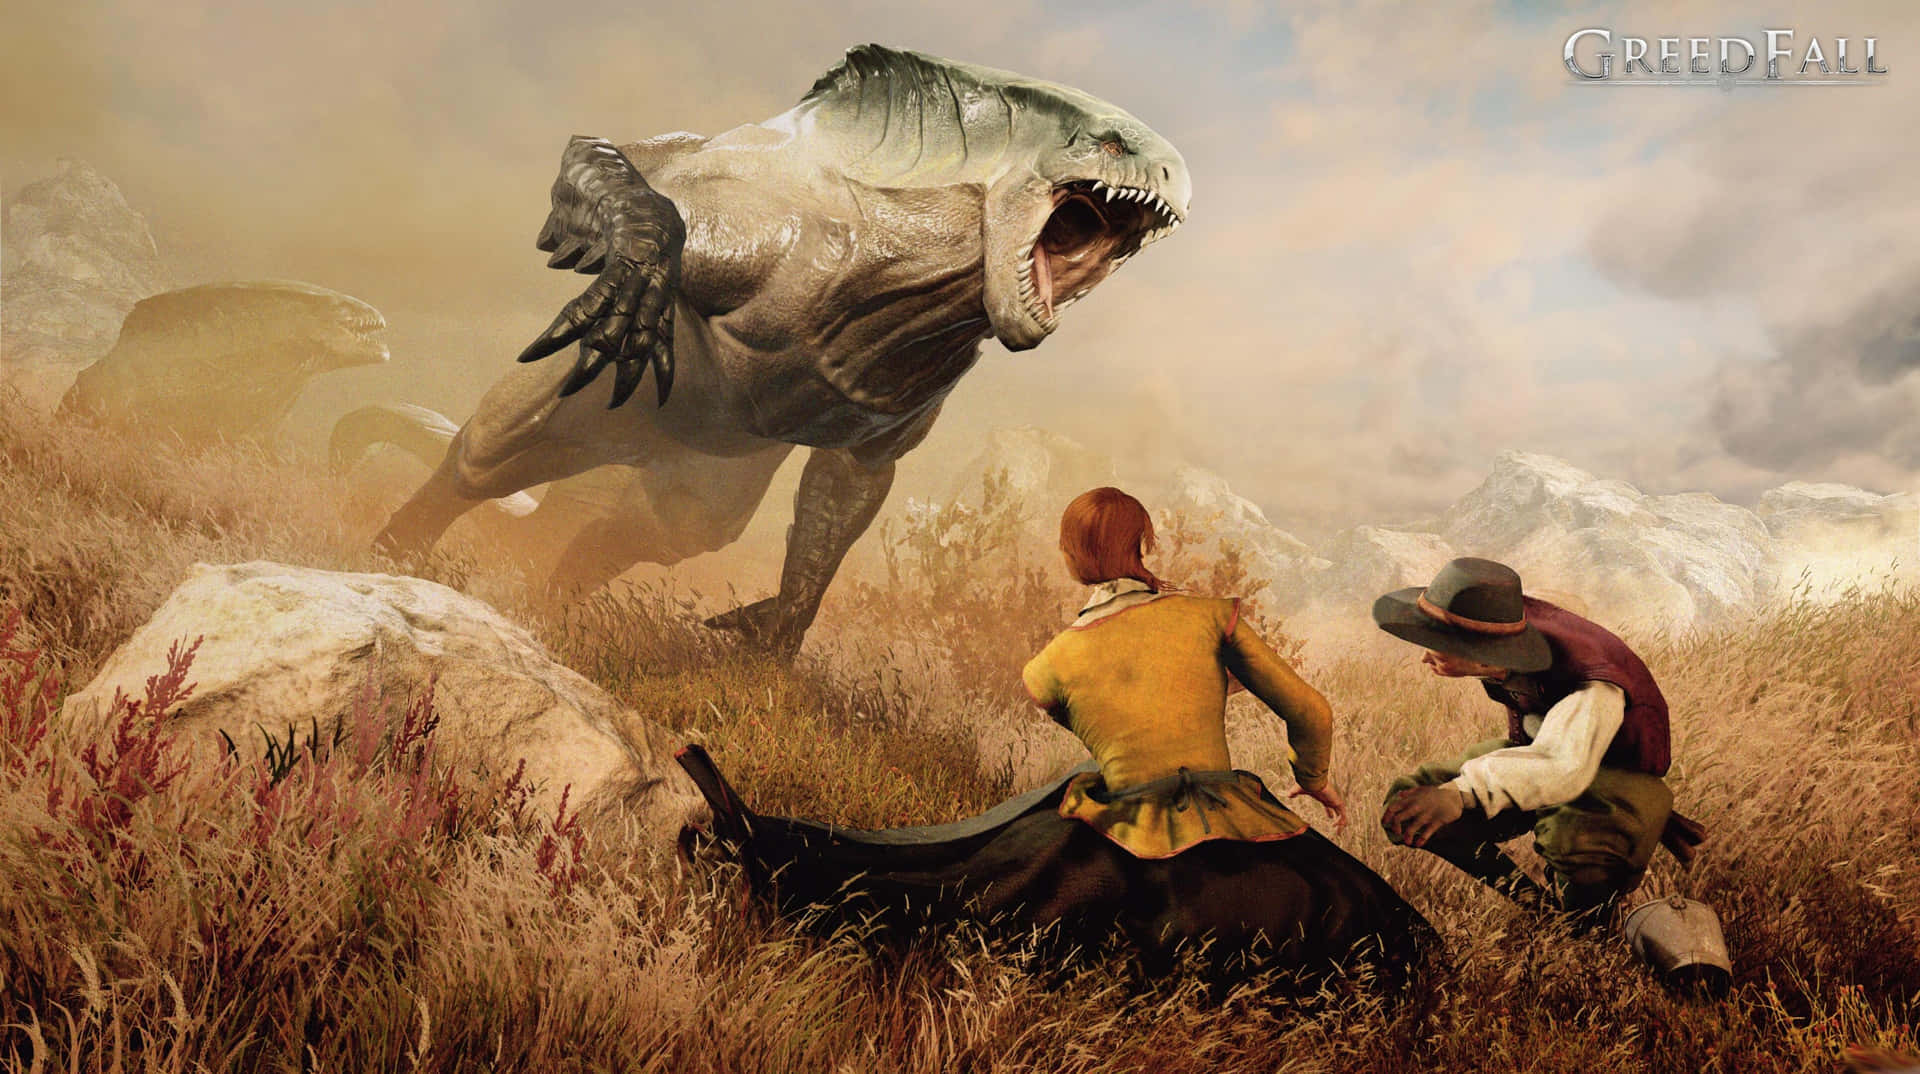 Hd Greedfall Background Couple Being Attacked By Monster Wallpaper